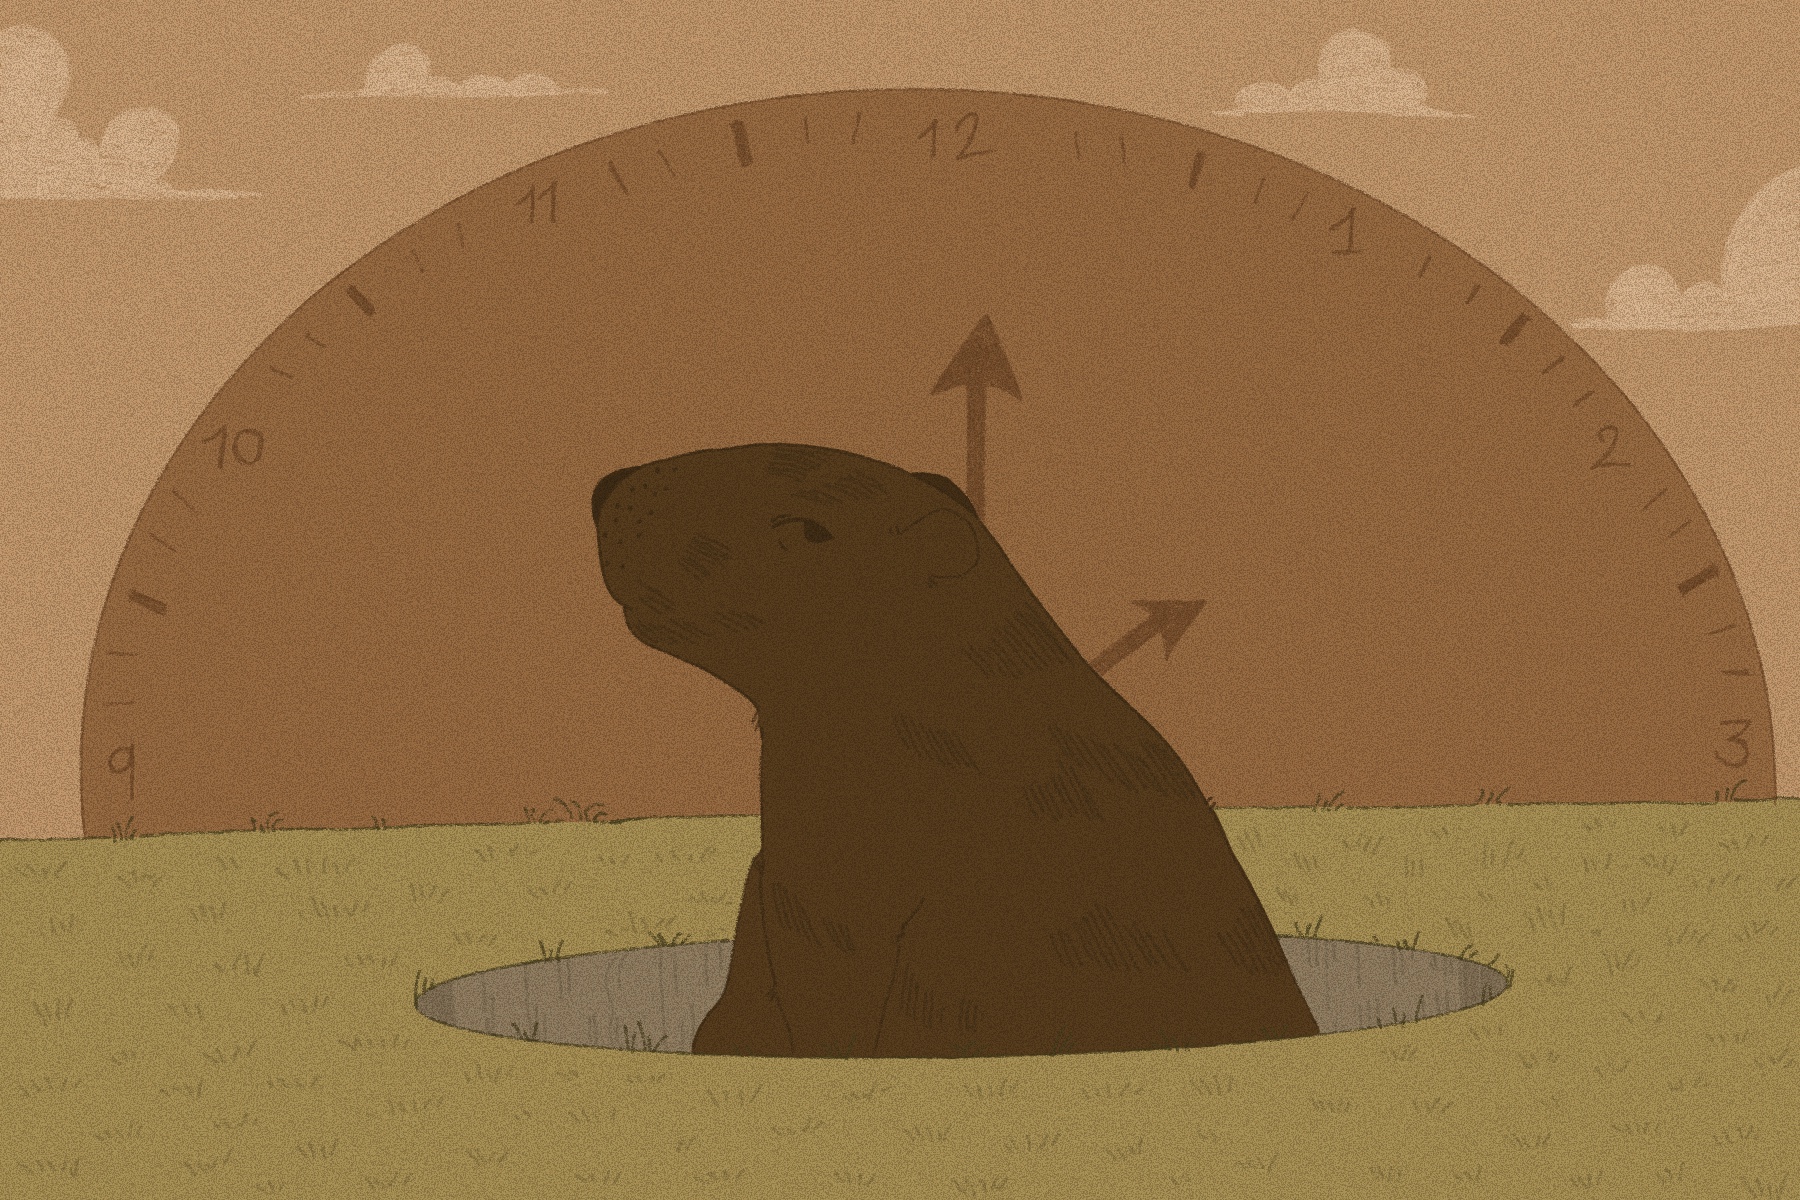 In this article about Groundhog Day, a groundhog peaks its head out of a hole in the ground.